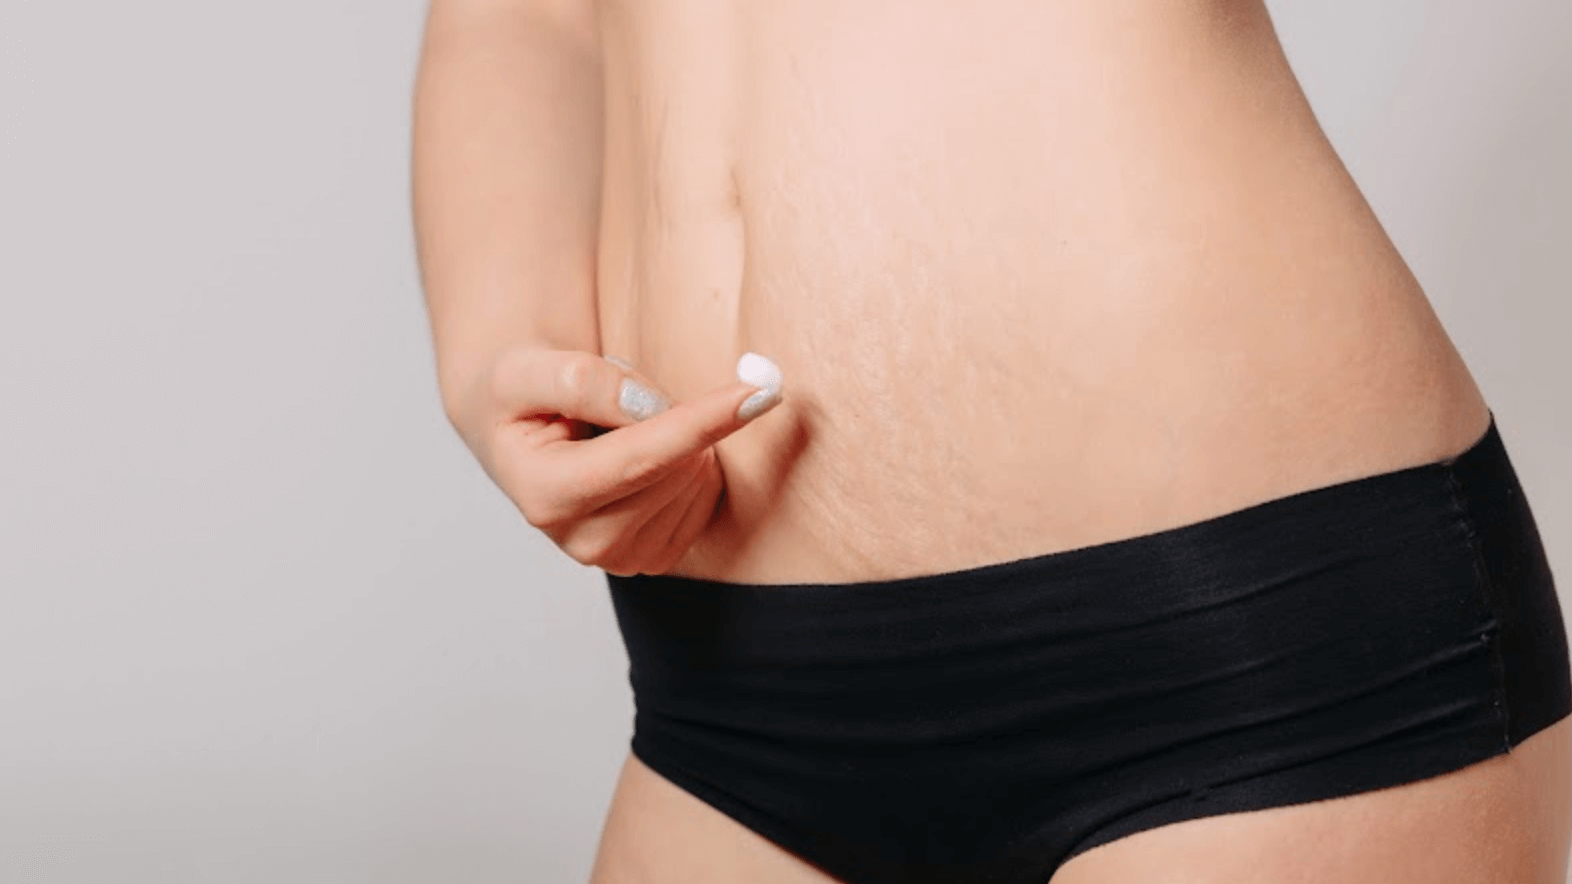 Morpheus8 treatment for stretch mark in belly